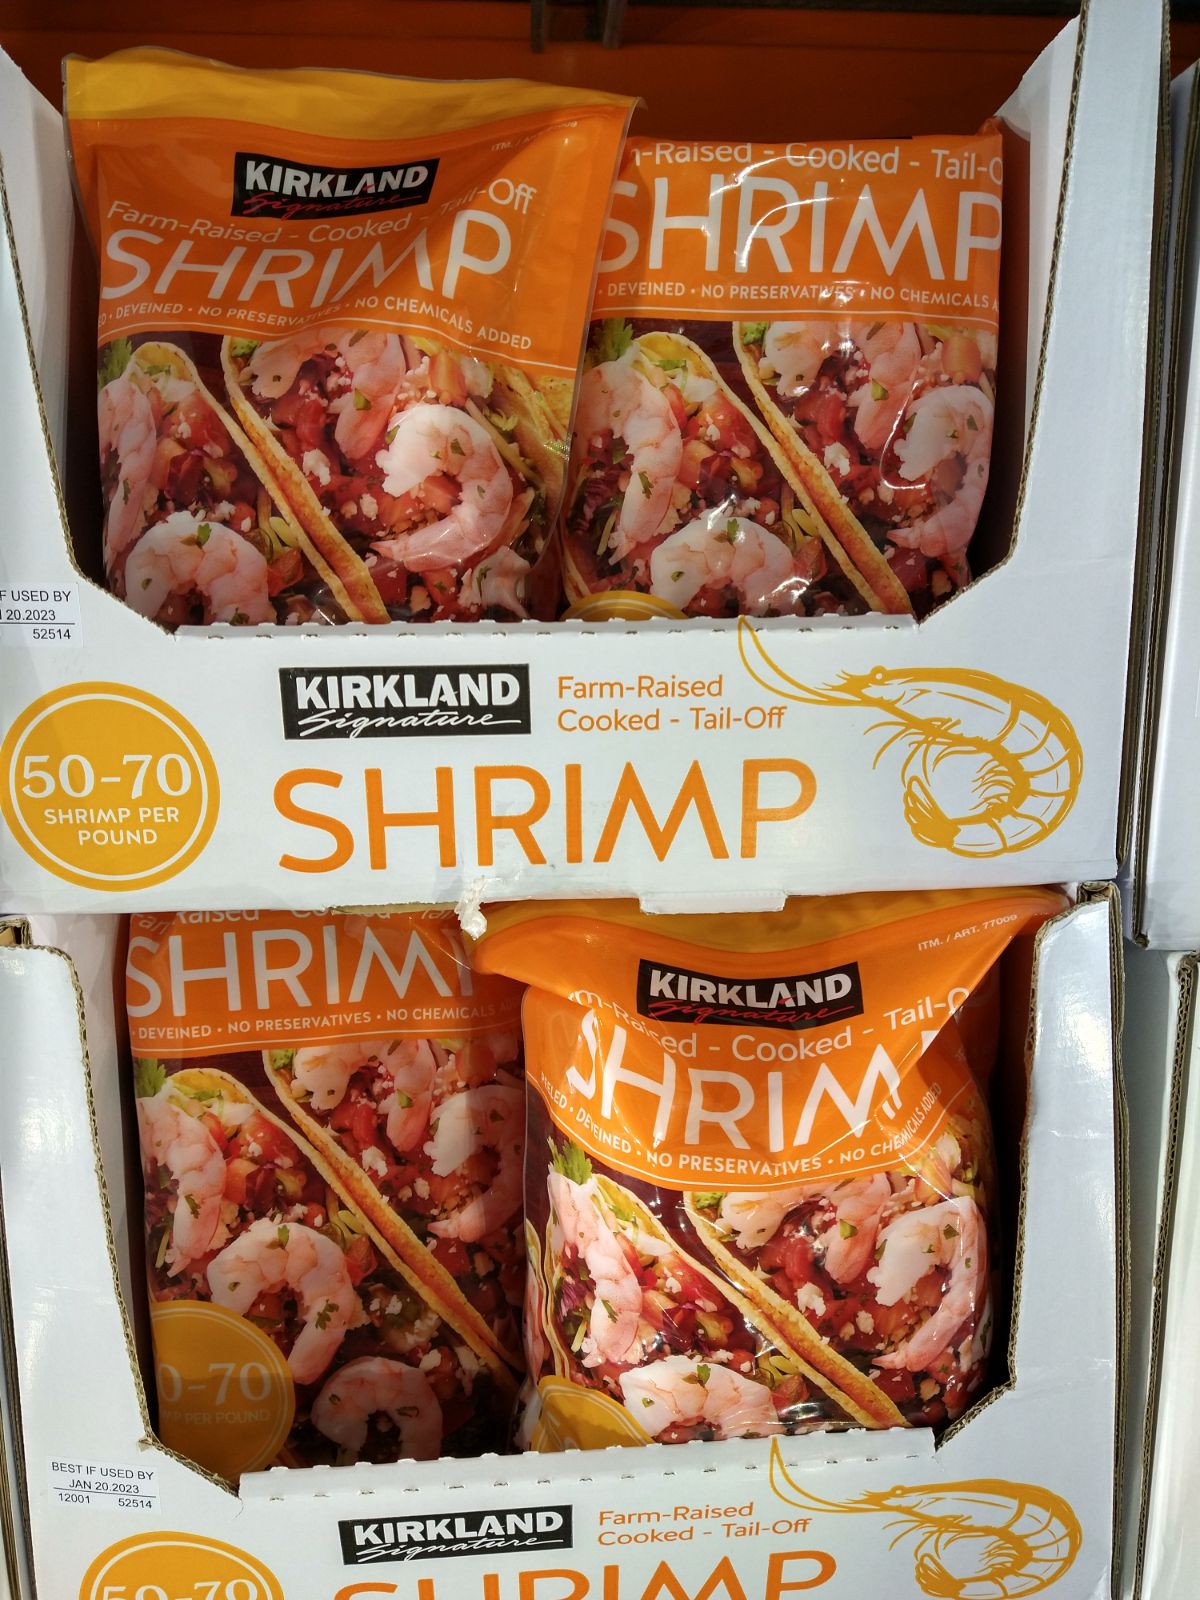 A box filled with orange bags of Kirkland Farm-Raised Cooked Tail Off shrimp.